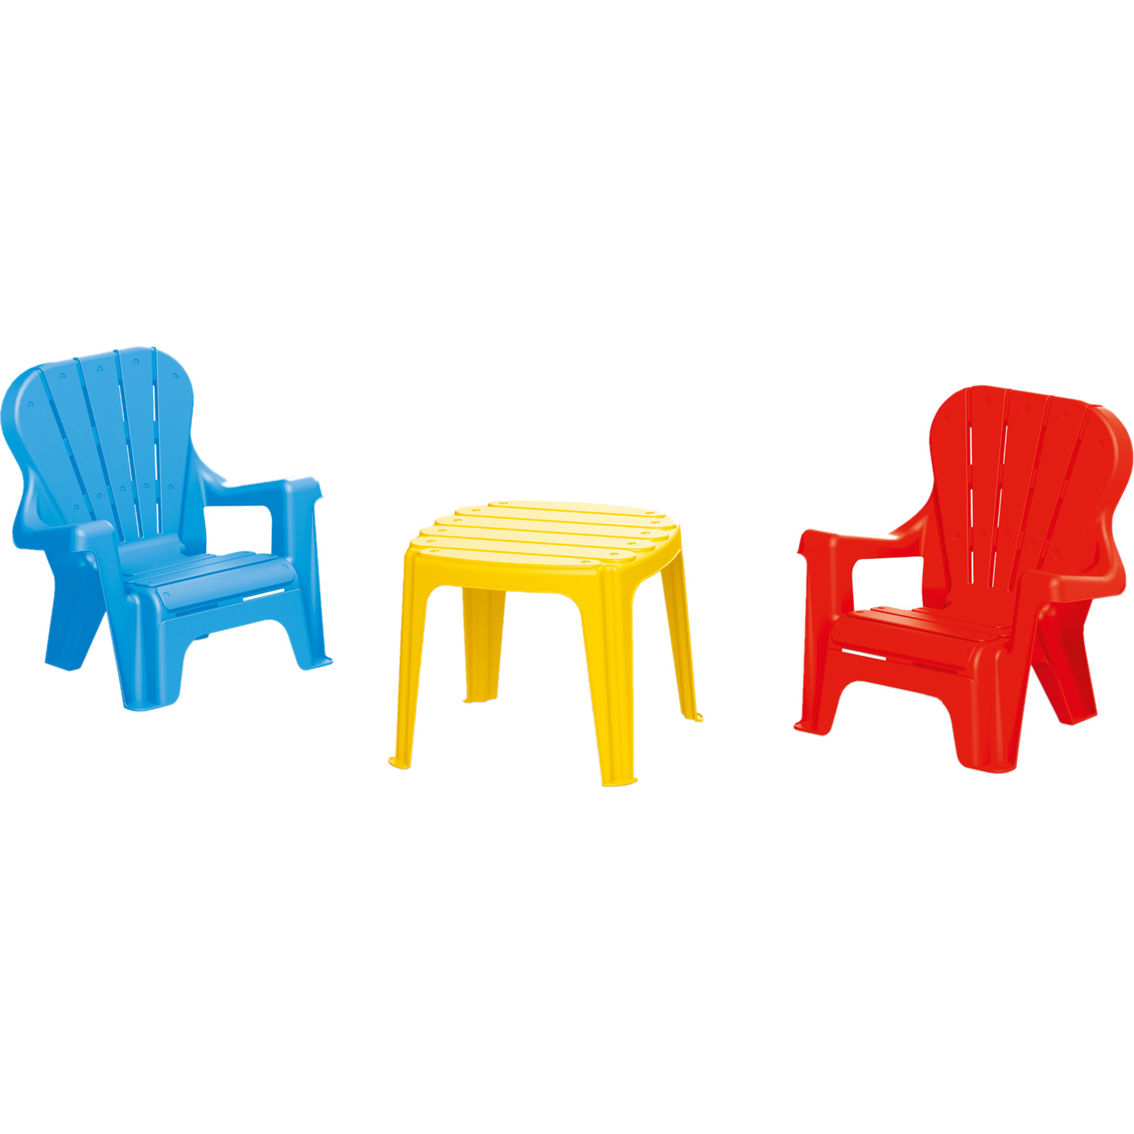 Dolu Toys Childrens Plastic Table and Chairs Set - Image 2 of 4